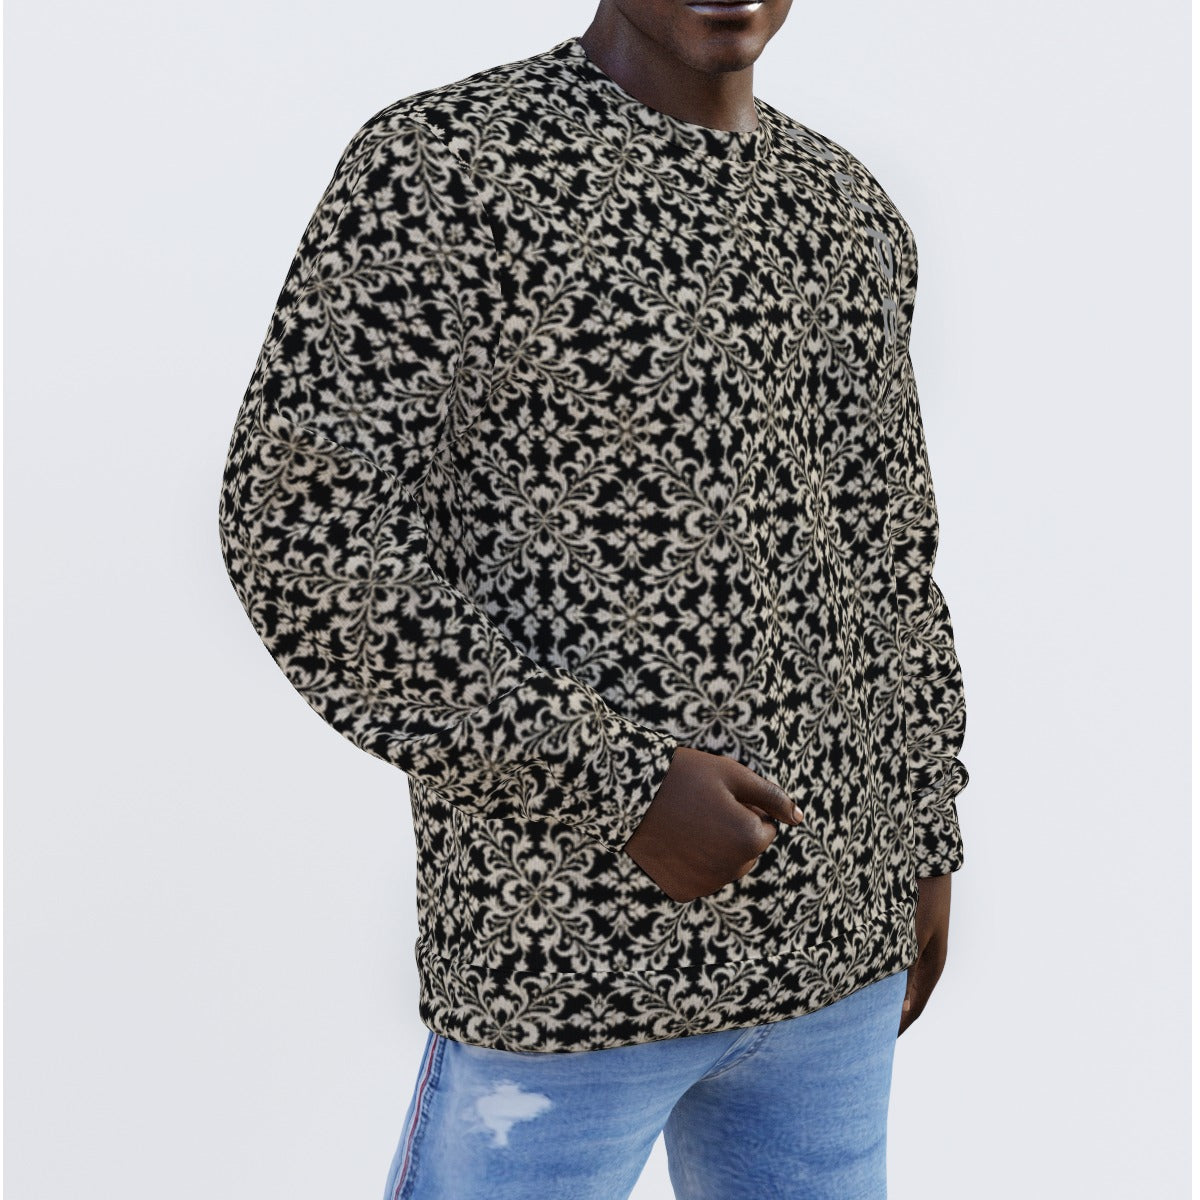 OUPE BAROQUE Men's SWEATER